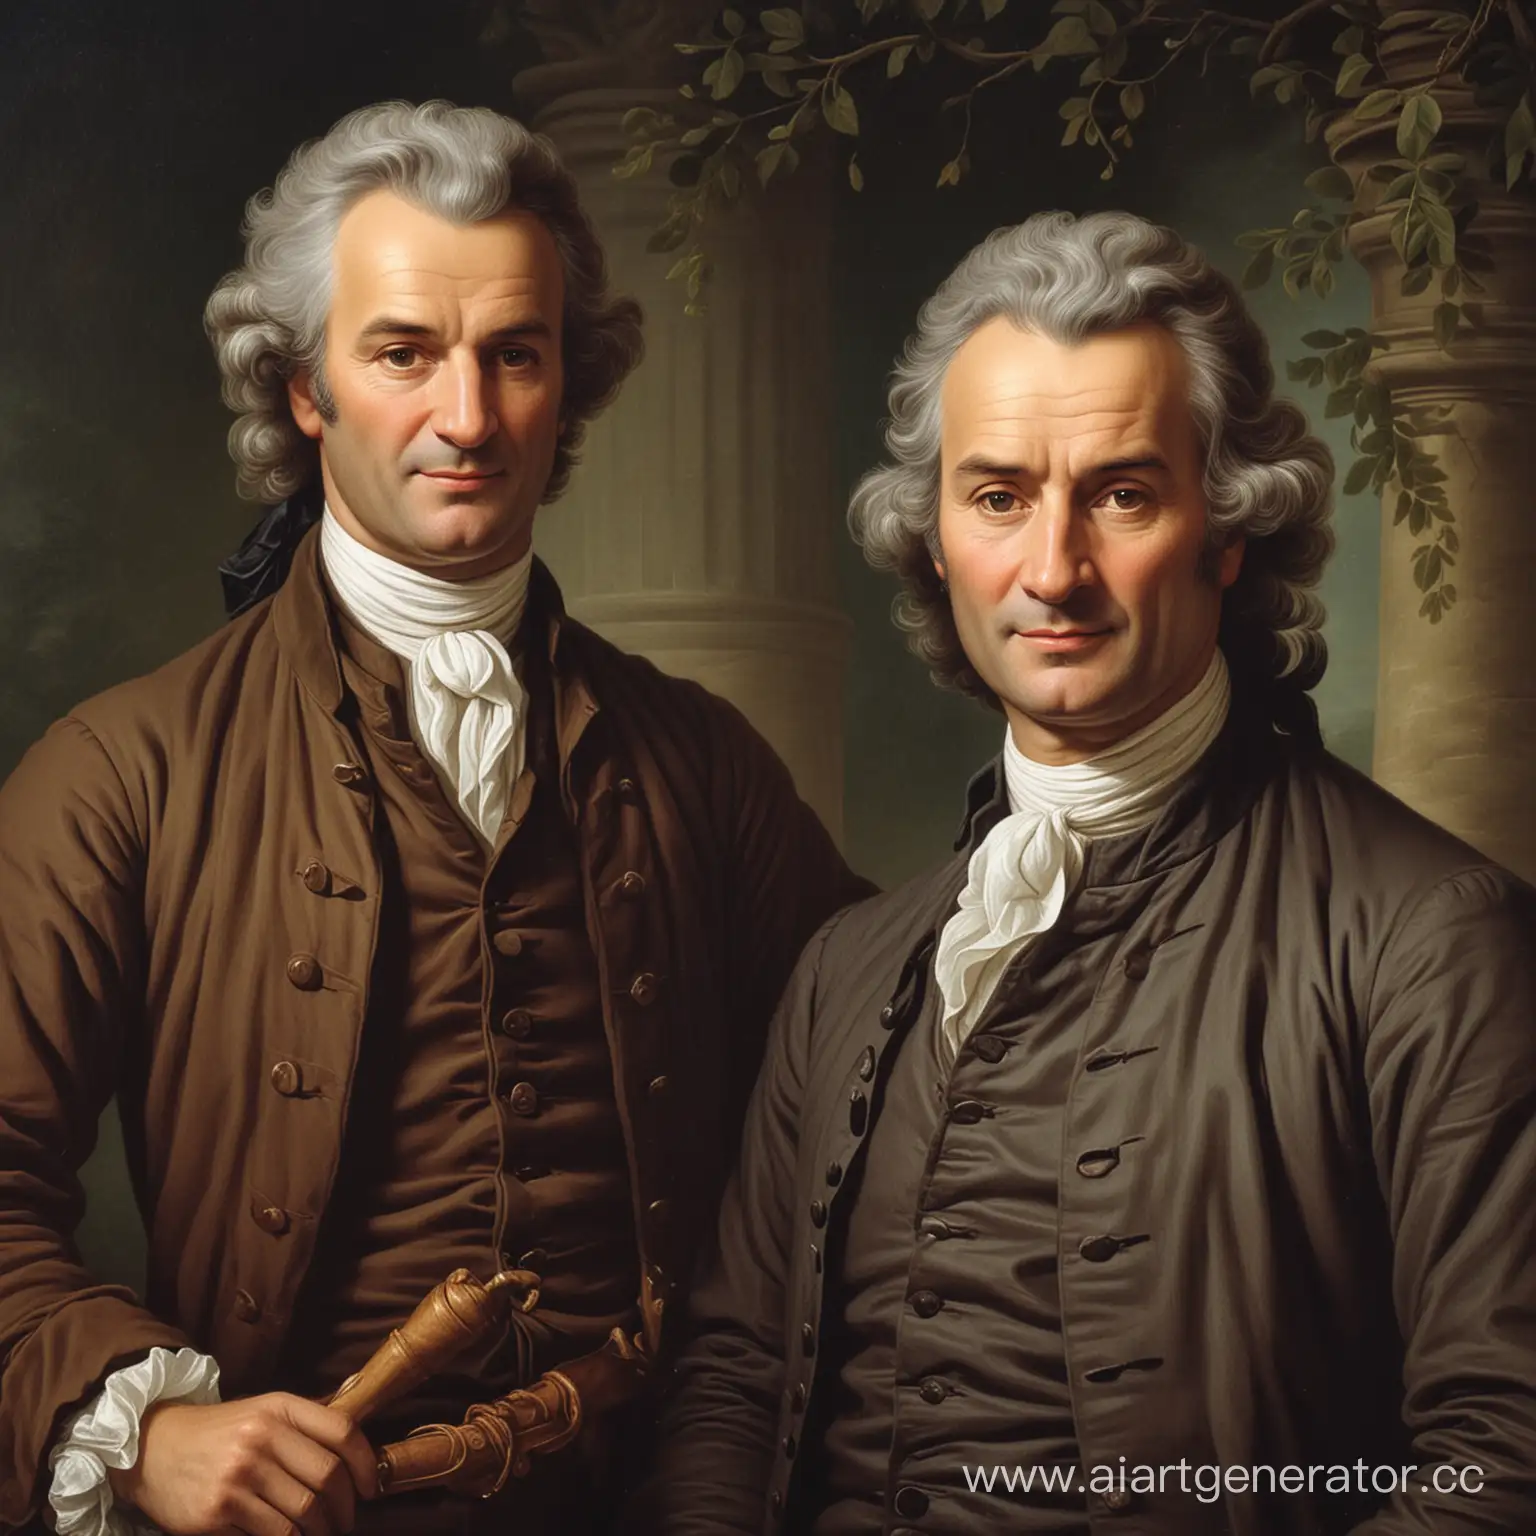 Philosophers-John-Locke-and-JeanJacques-Rousseau-Engage-in-Intellectual-Discourse